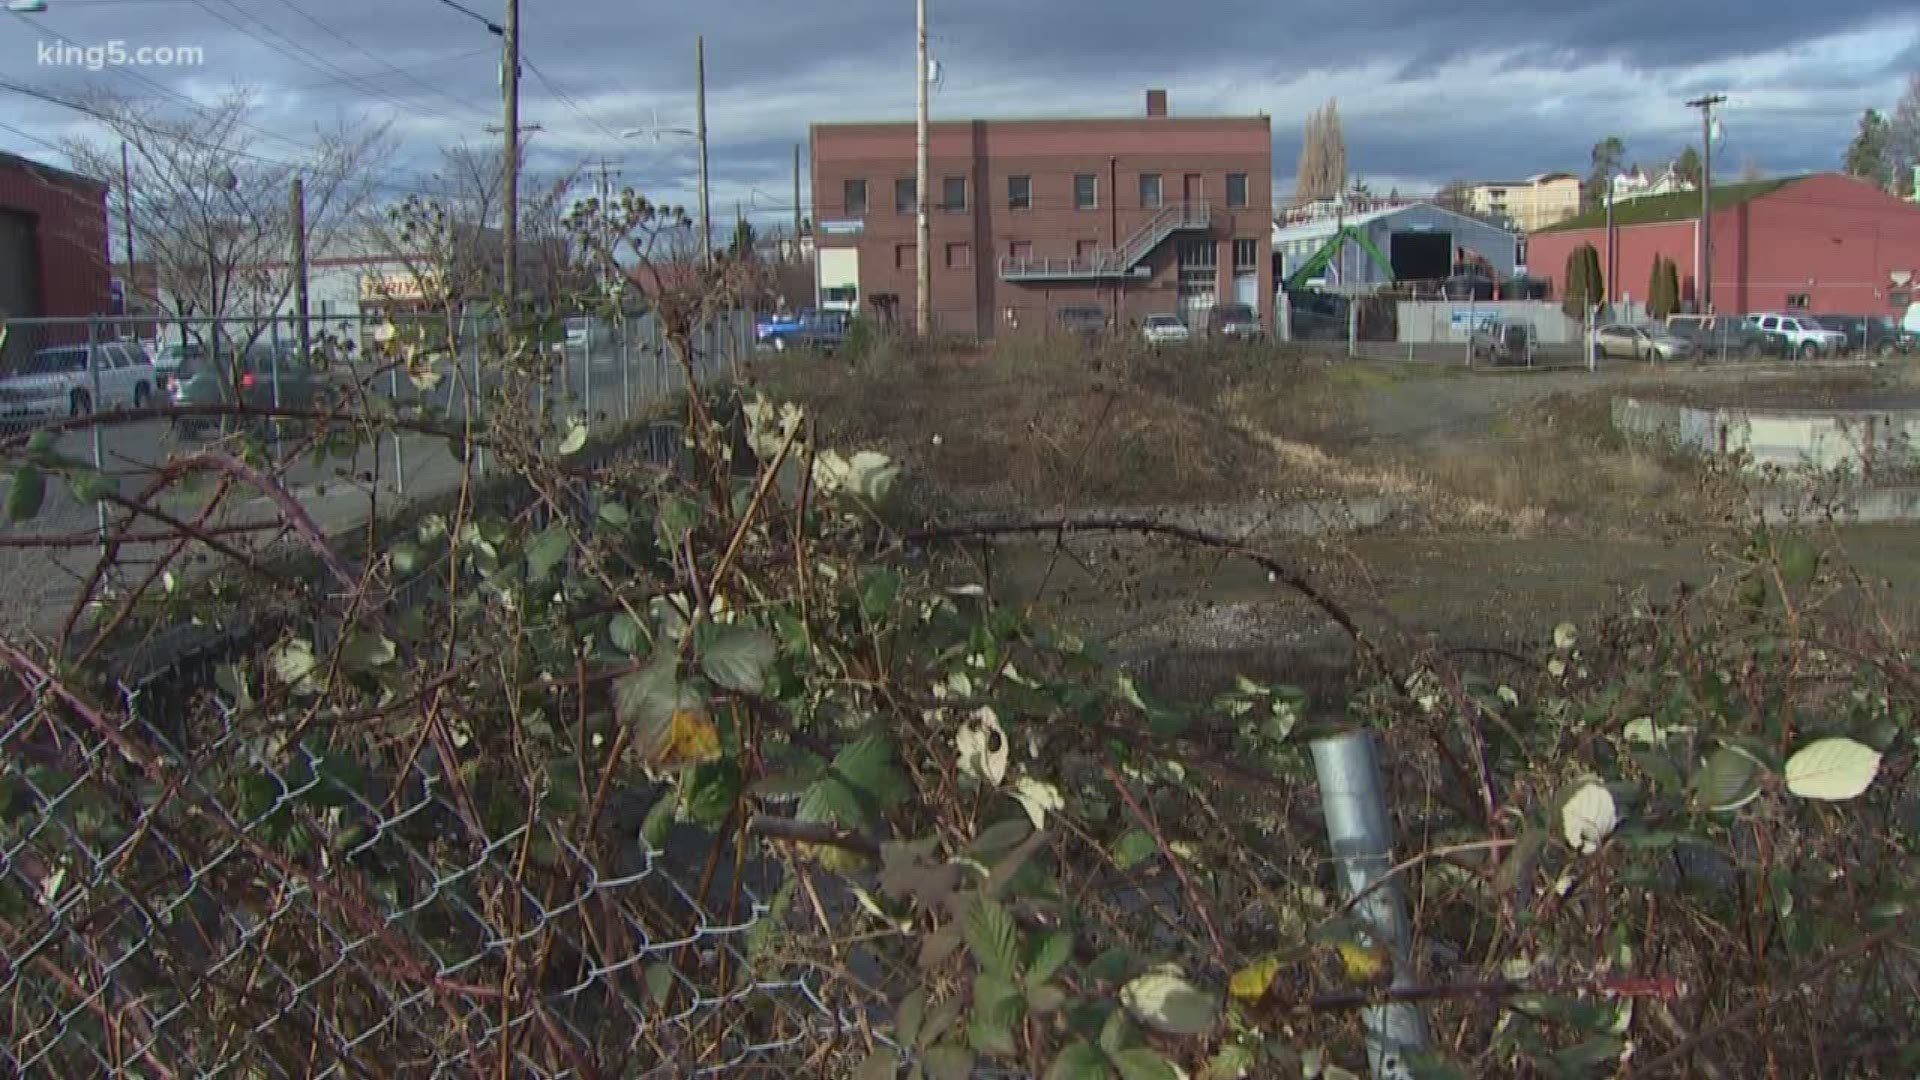 In Bellingham, a plan to make the city's "Old Town" new again. A major redevelopment is proposed, but could it clash with homeless services that have been in the neighborhood for generations? KING 5's Eric Wilkinson takes a look.